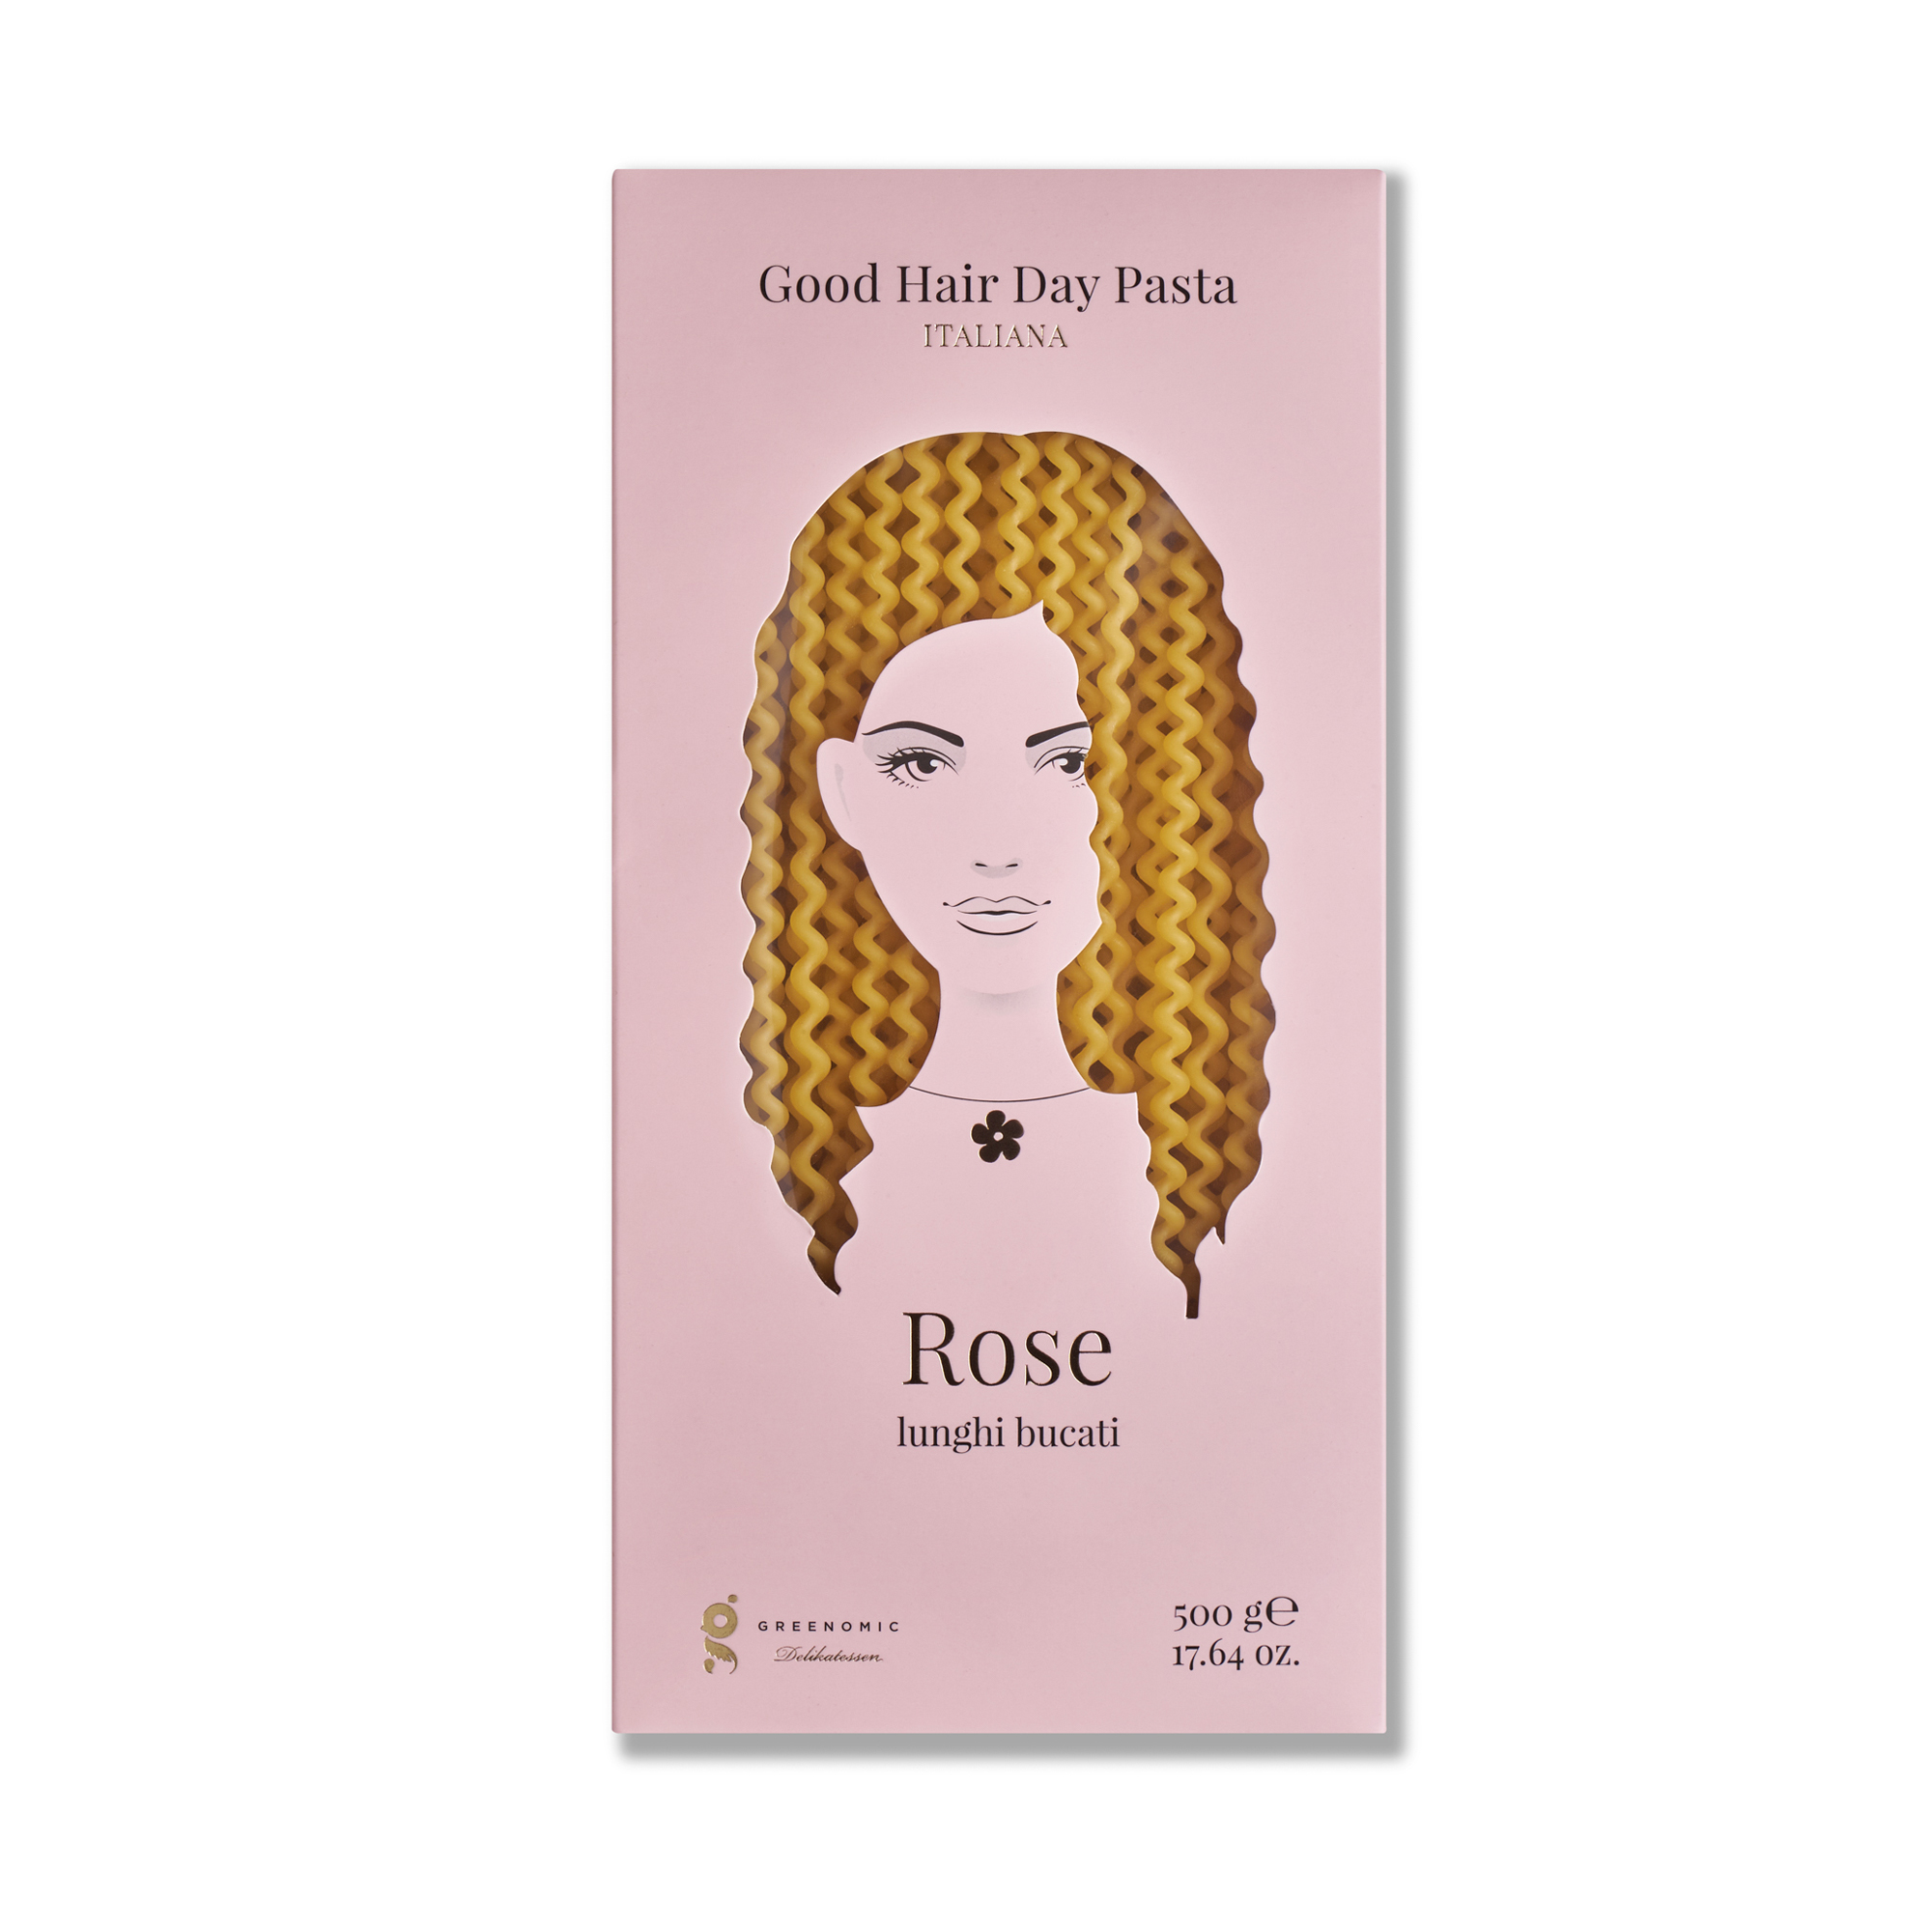 Good Hair Day Pasta Rose lunghi bucati 500g